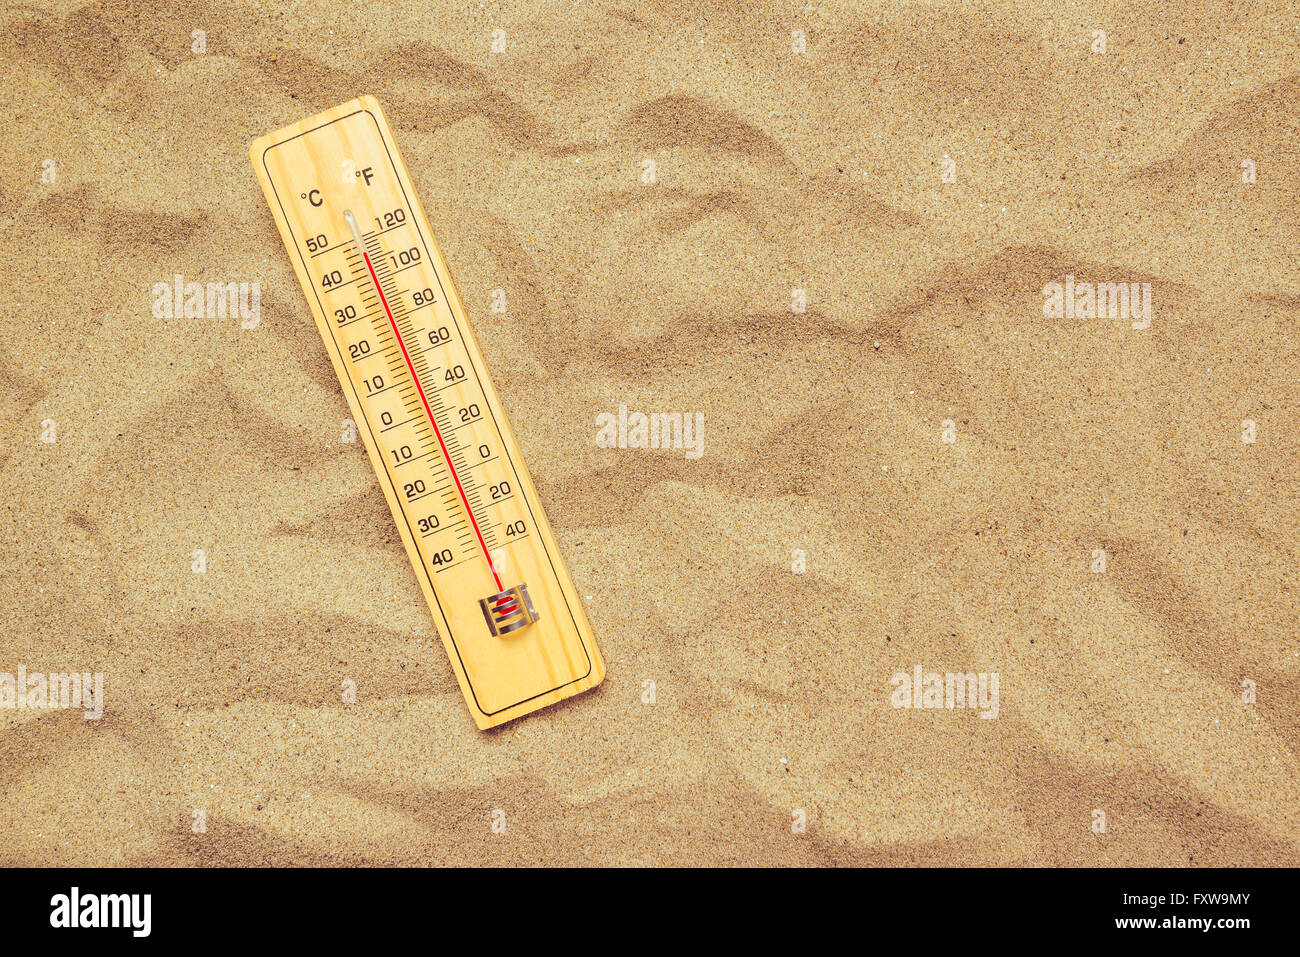 Record high temperatures, thermometer with celsius and farenheit scale on warm desert sand. Stock Photo